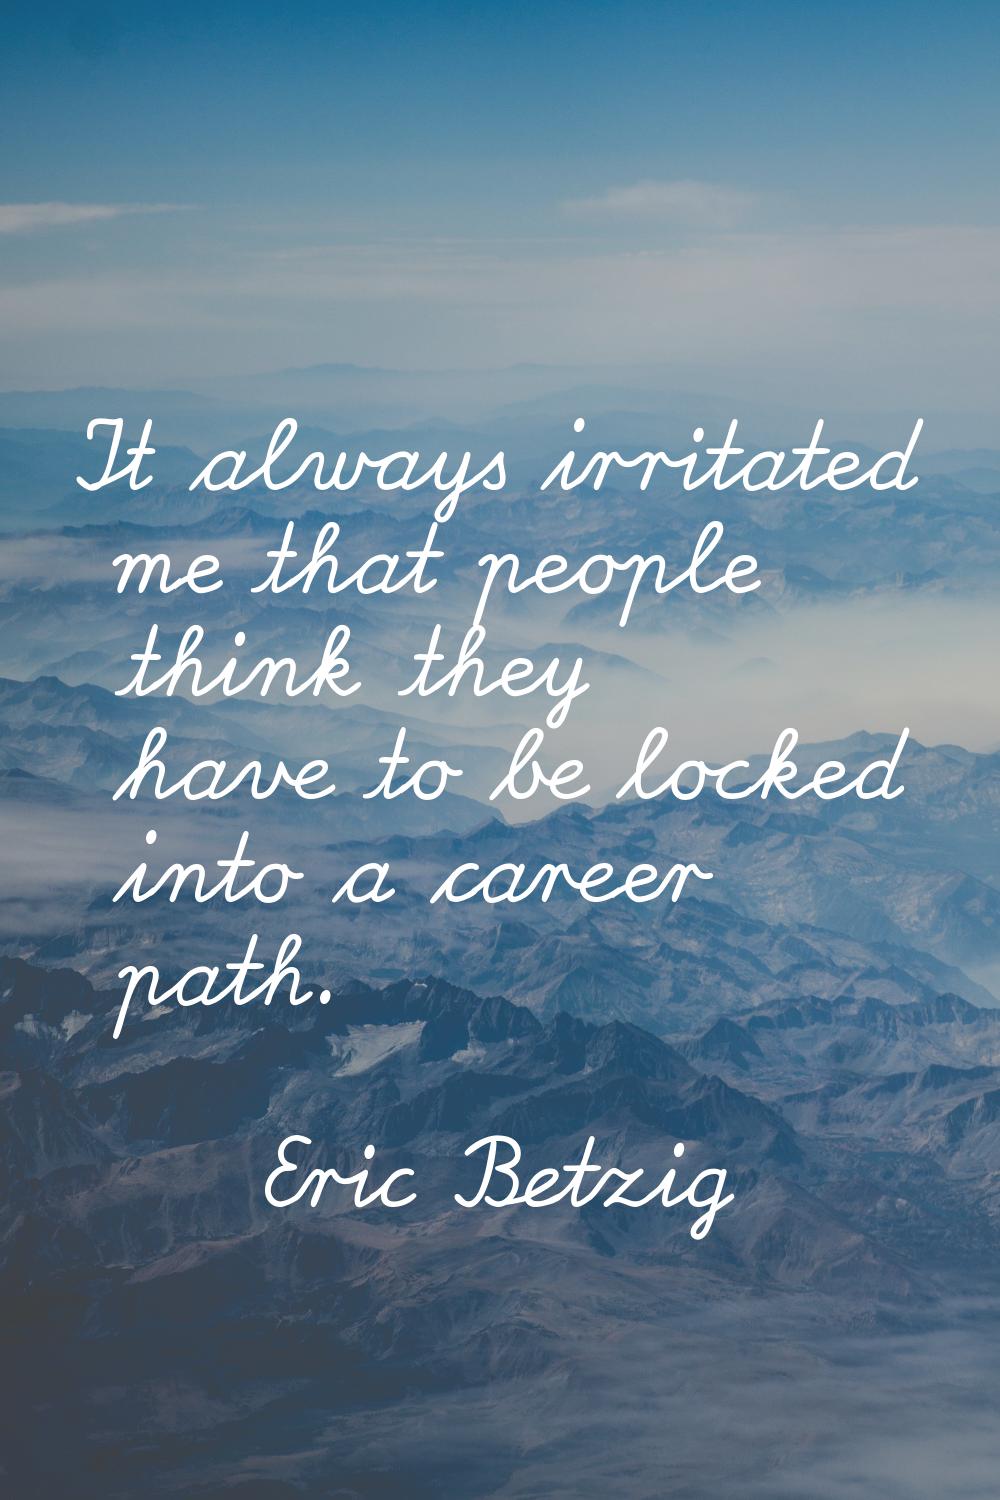 It always irritated me that people think they have to be locked into a career path.